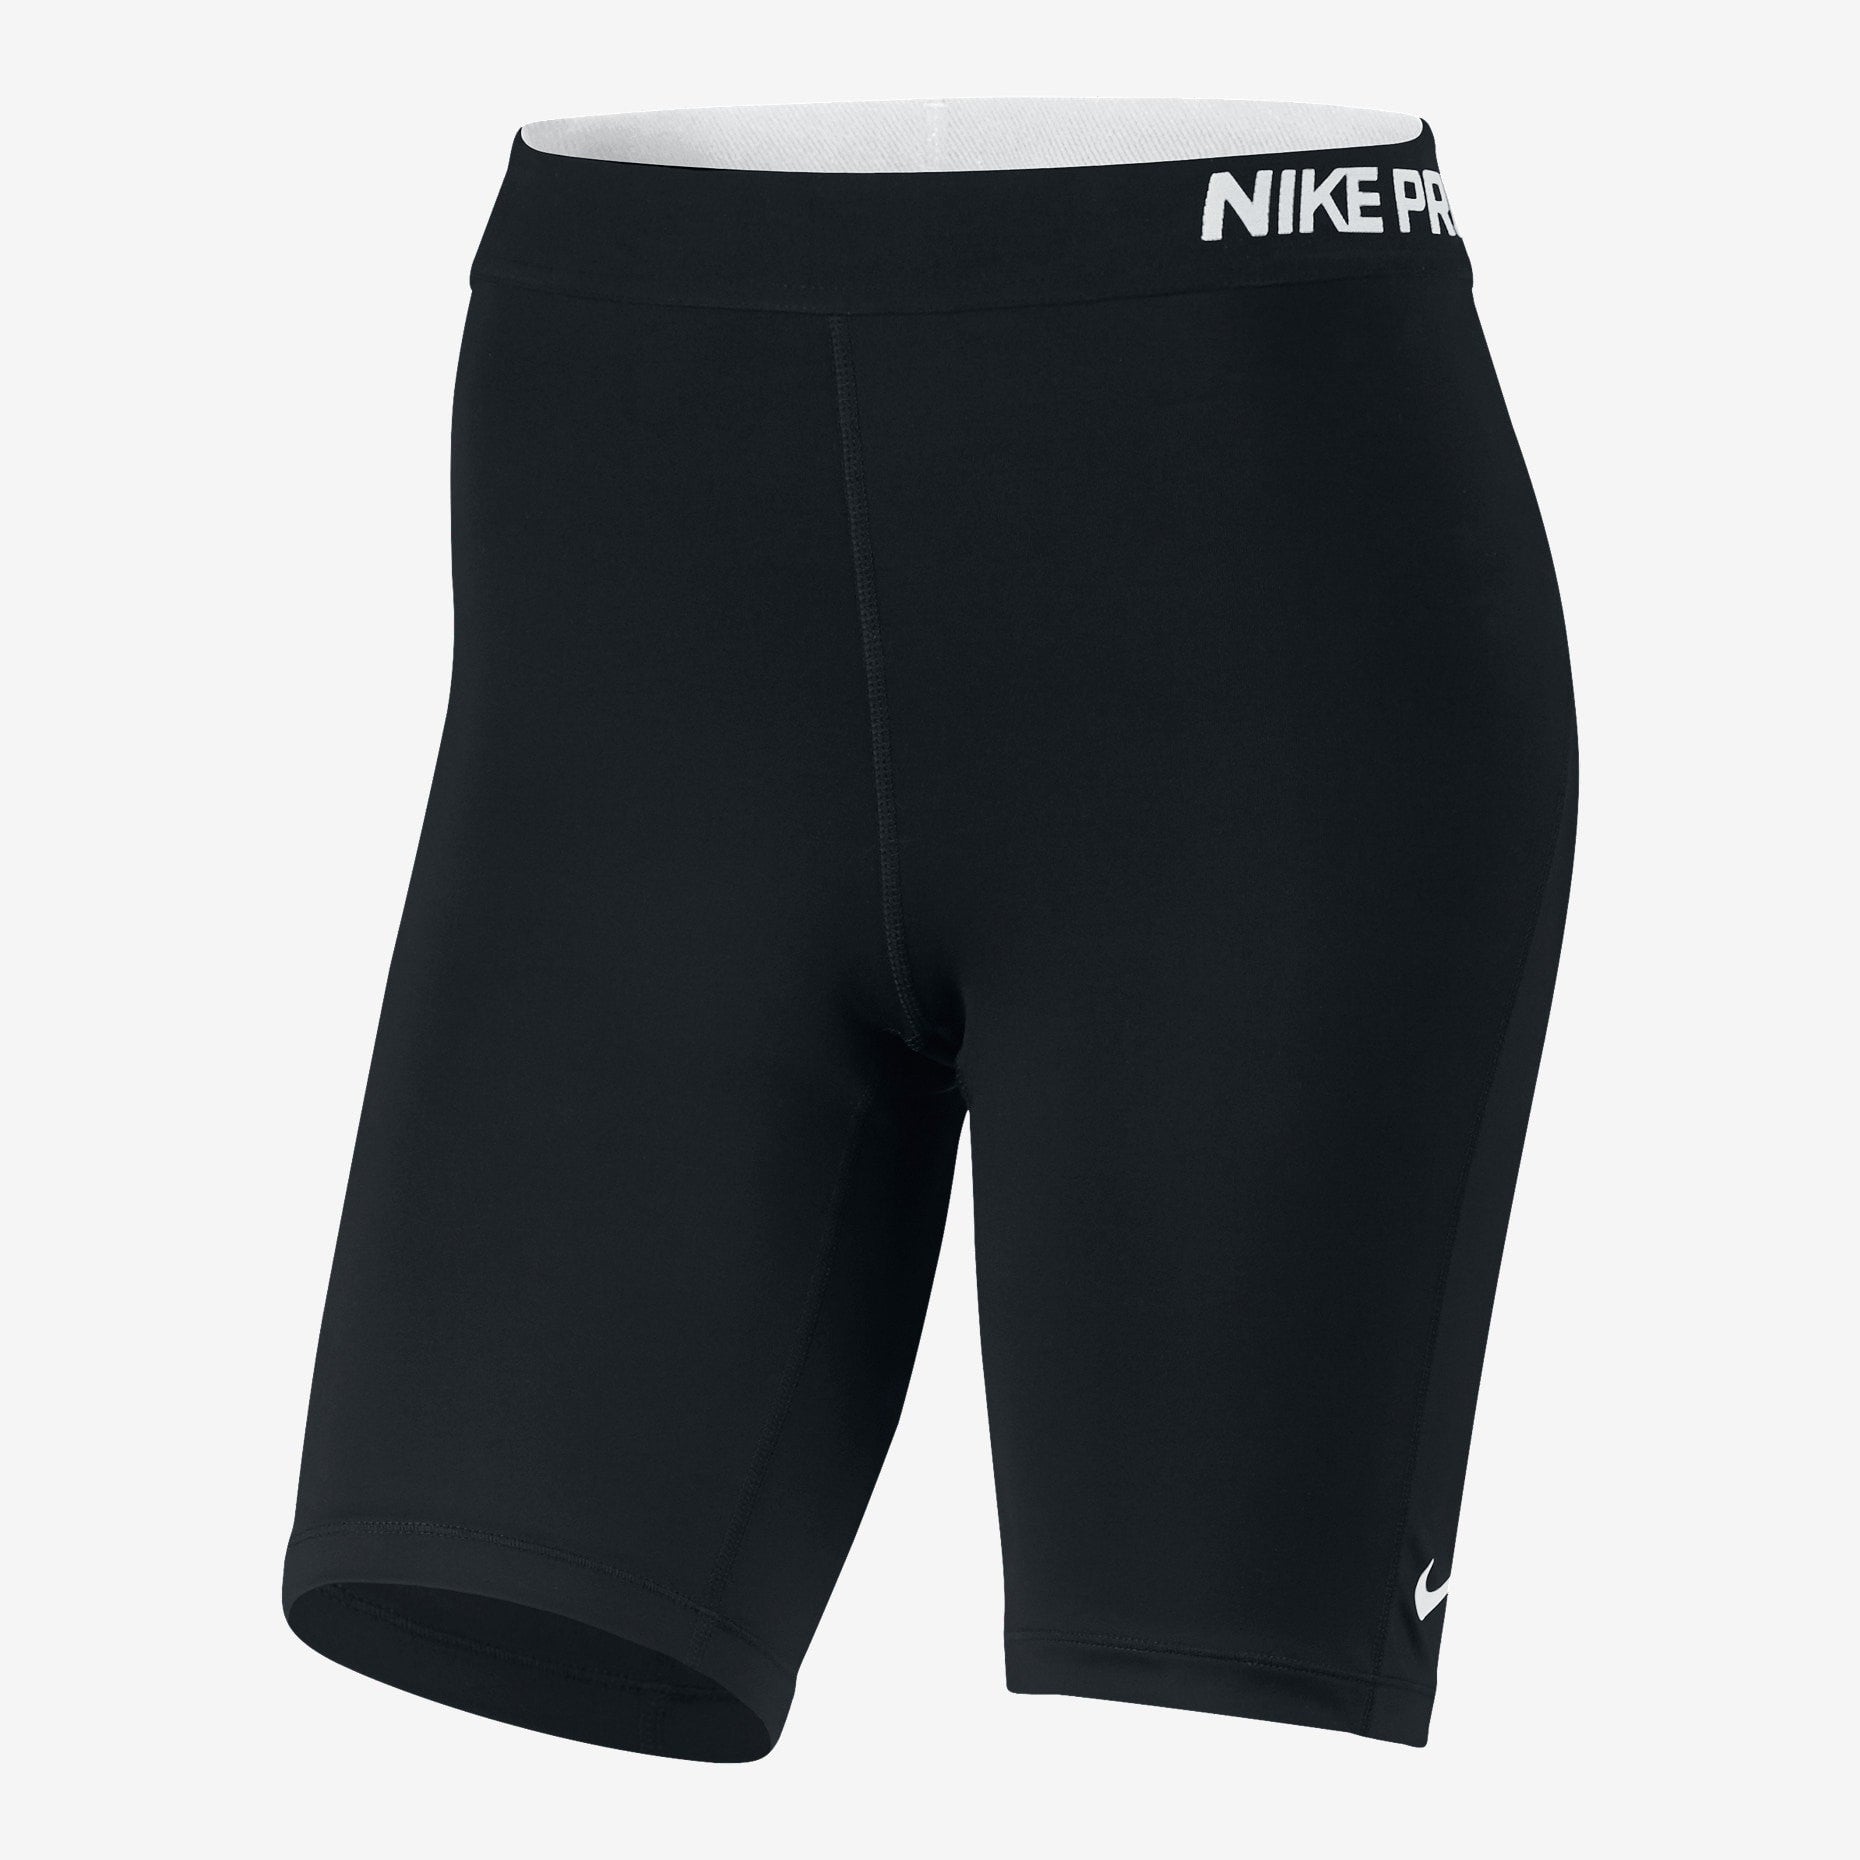 Shop Nike Pro Combat Short Leggings with great discounts and